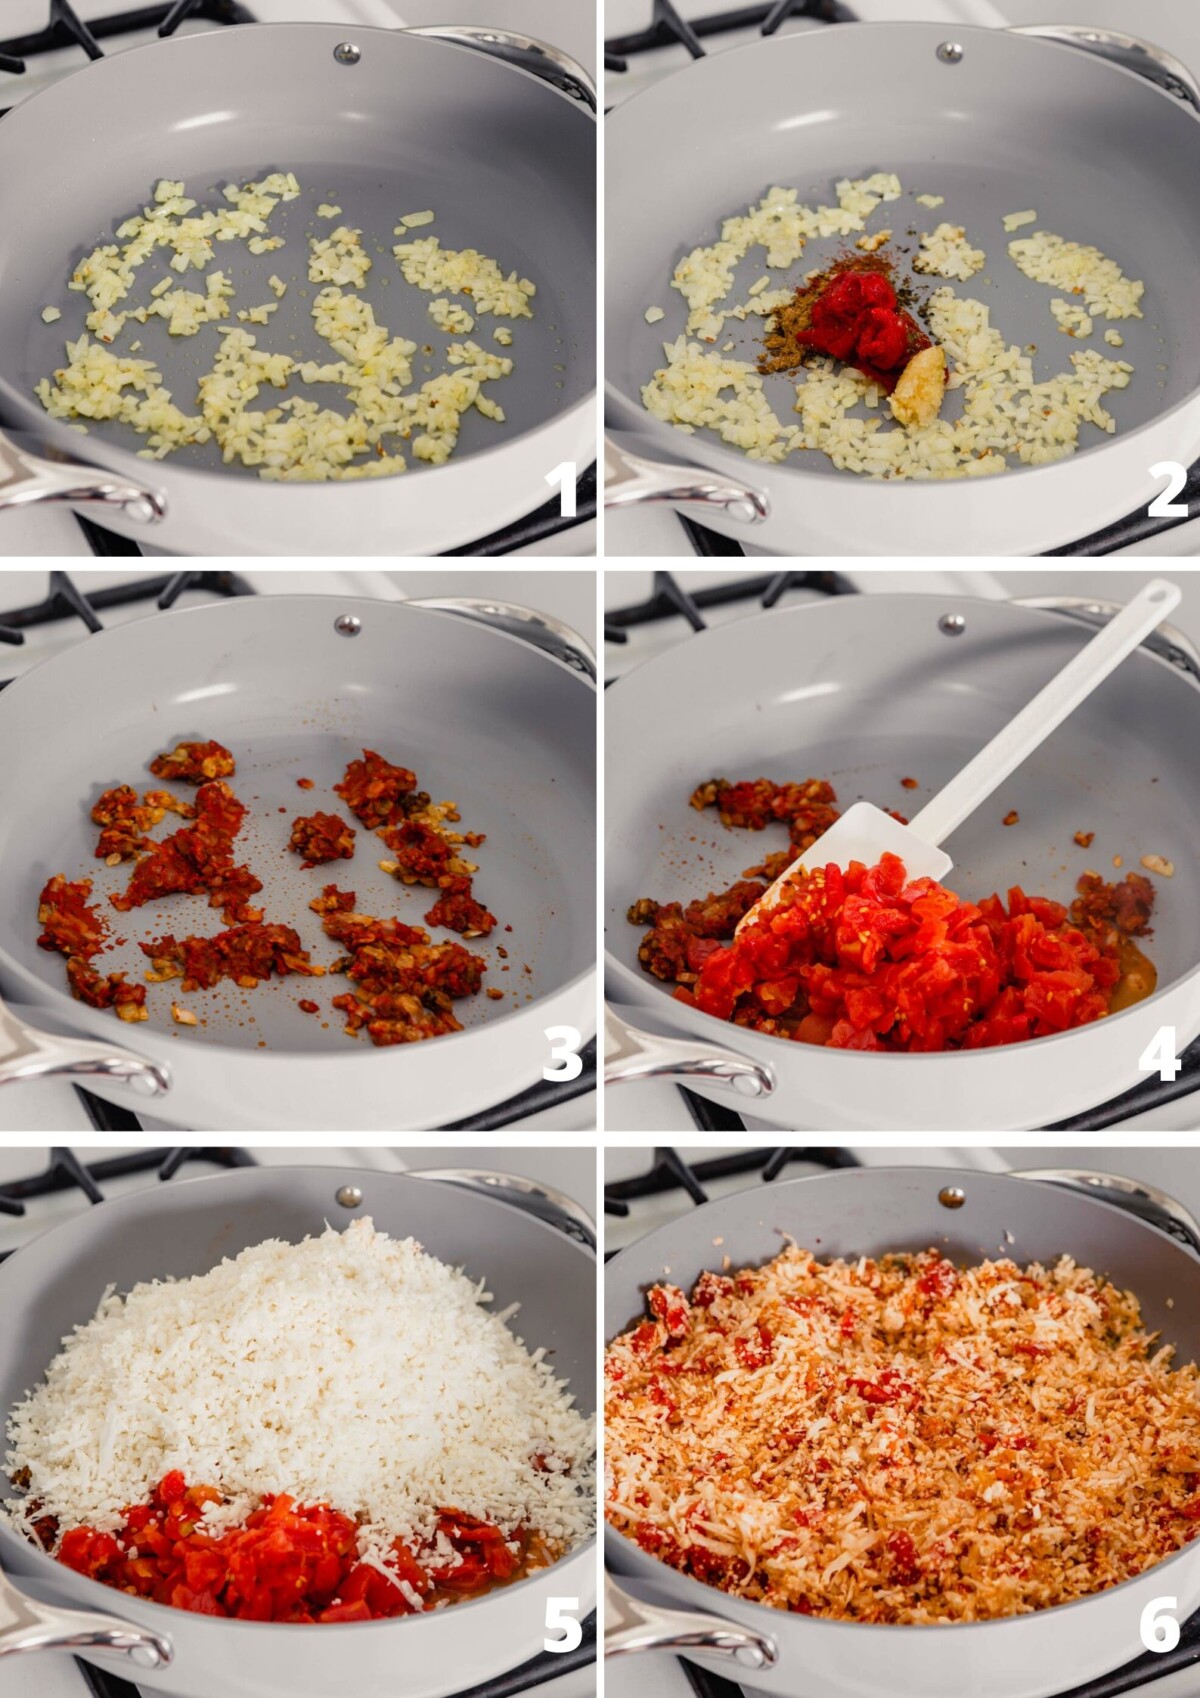 grid of images showing the process of cooking the rice